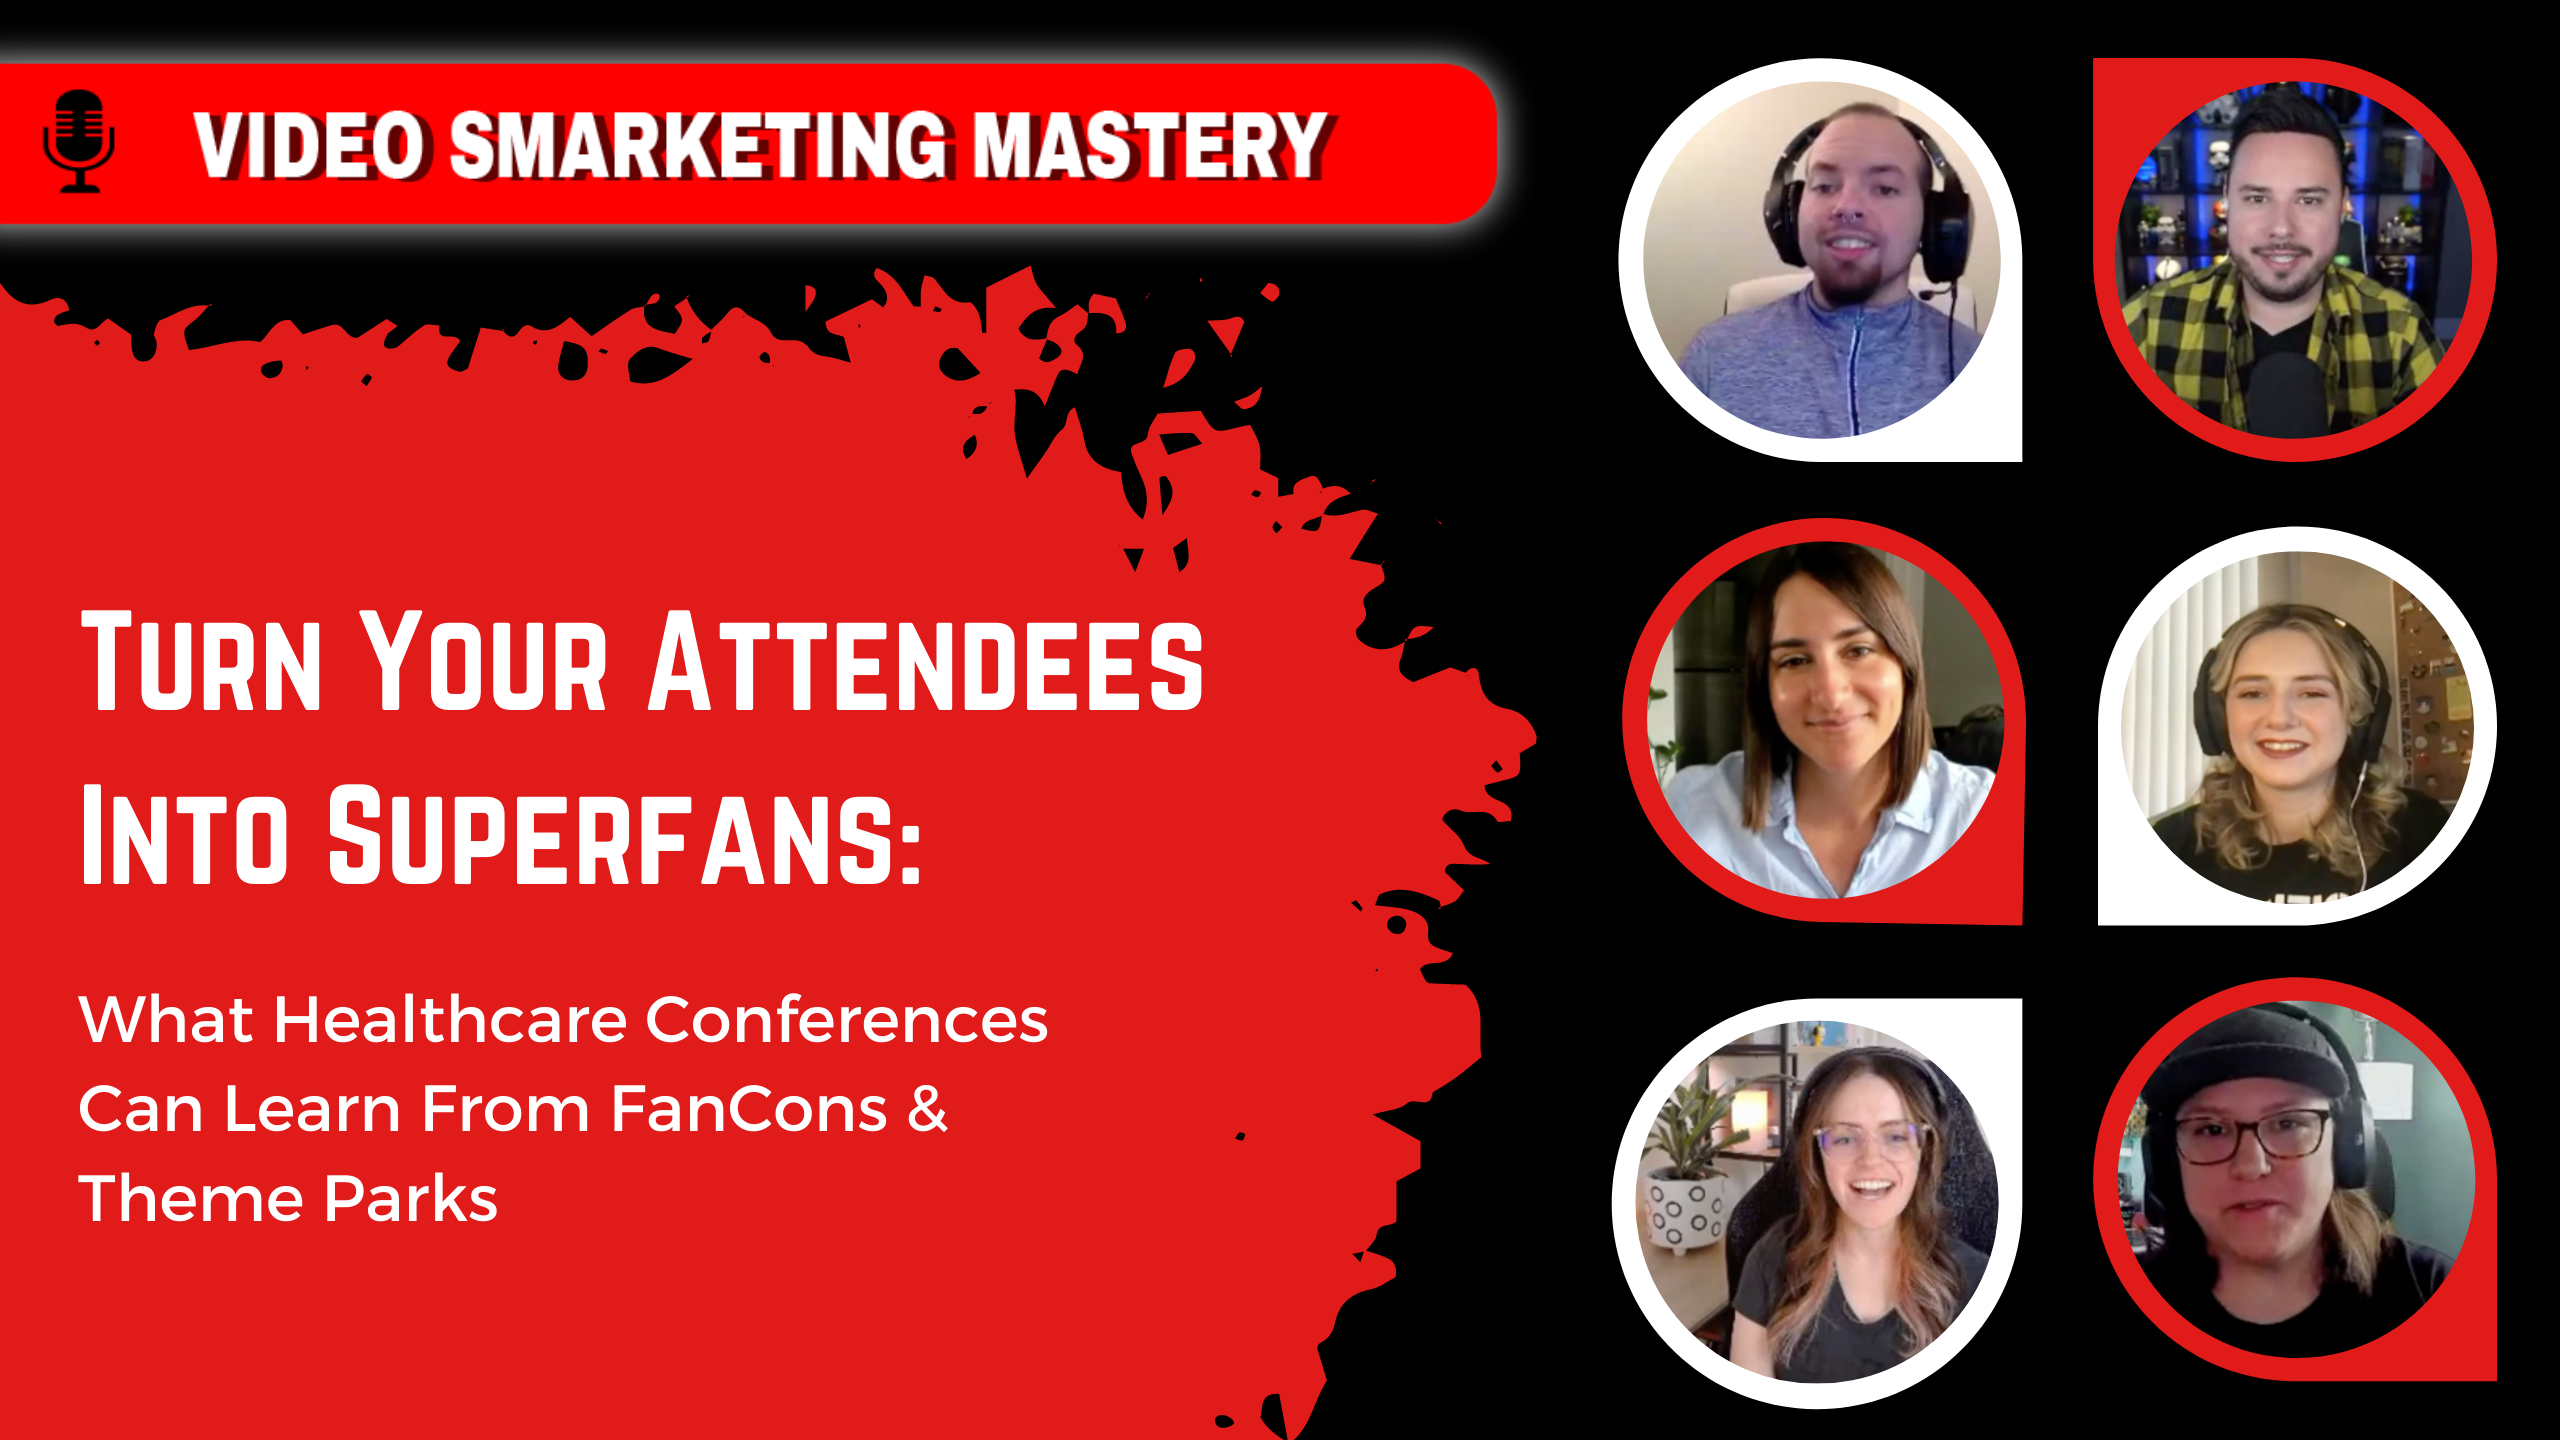 Turn Attendees Into Superfans - What Healthcare Conferences Can Learn From FanCons & Theme Parks